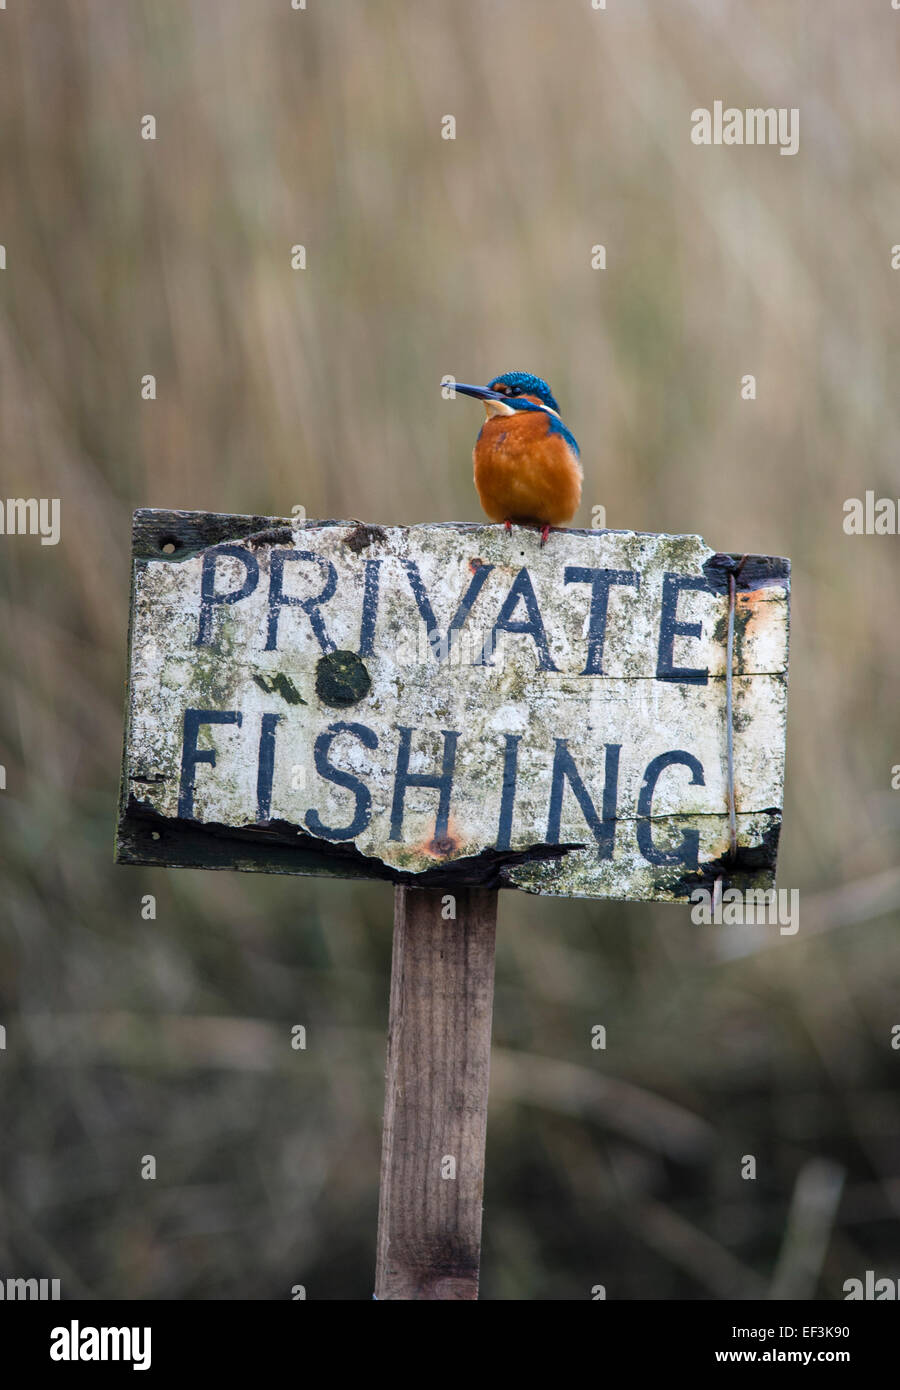 Kingfisher -  Alcedo atthis on Private Fishing sign Stock Photo